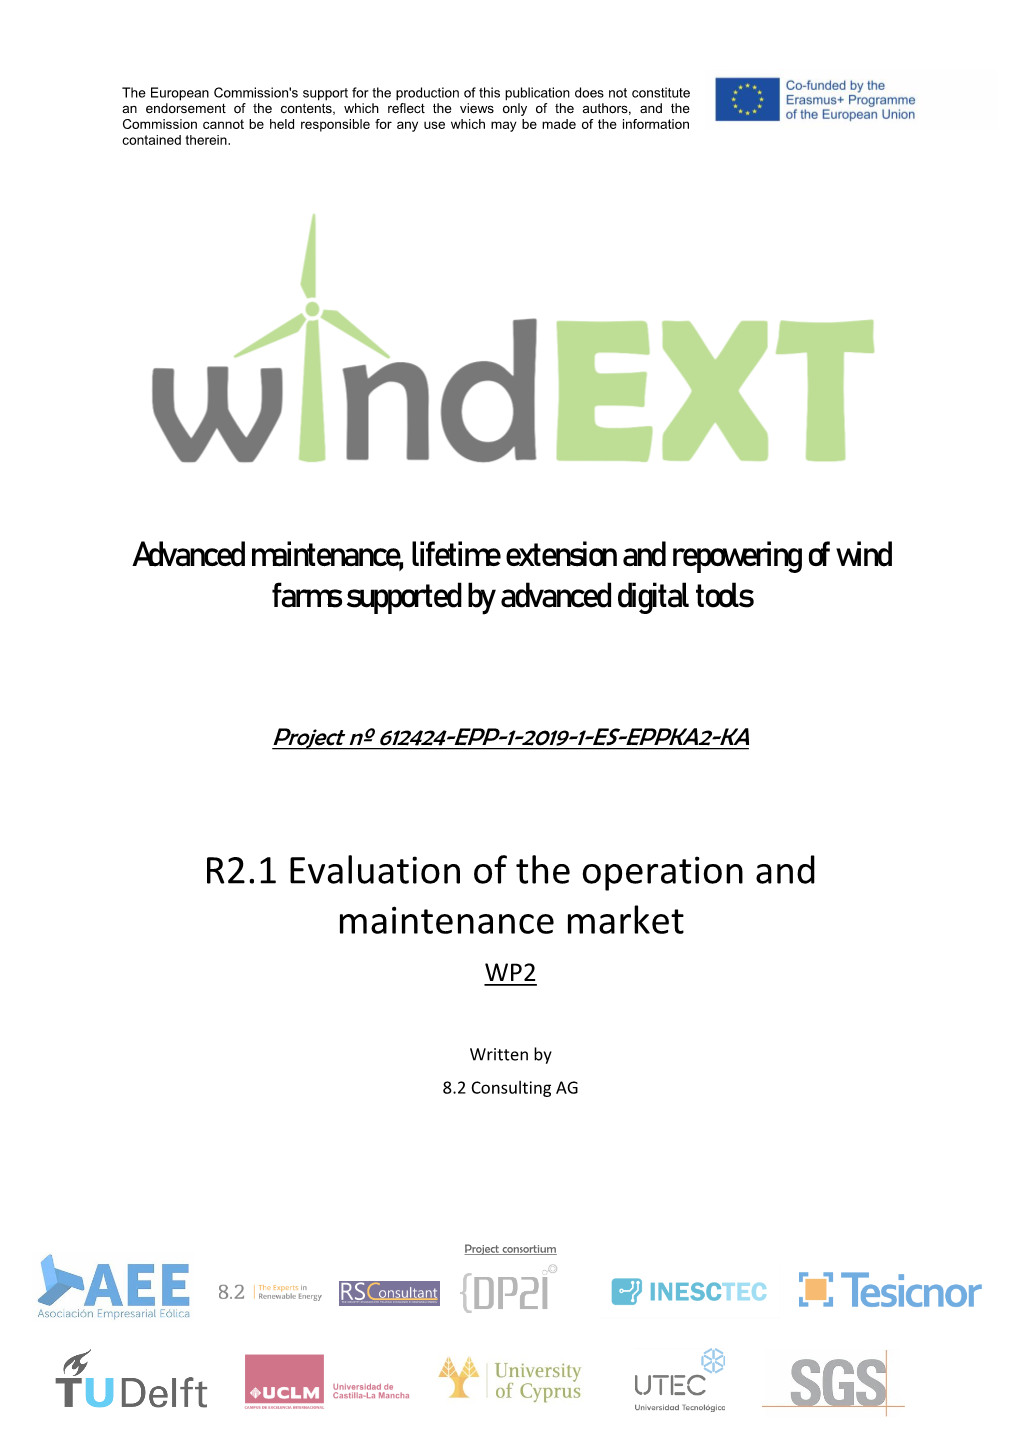 Evaluation of the Operation and Maintenance Market WP2